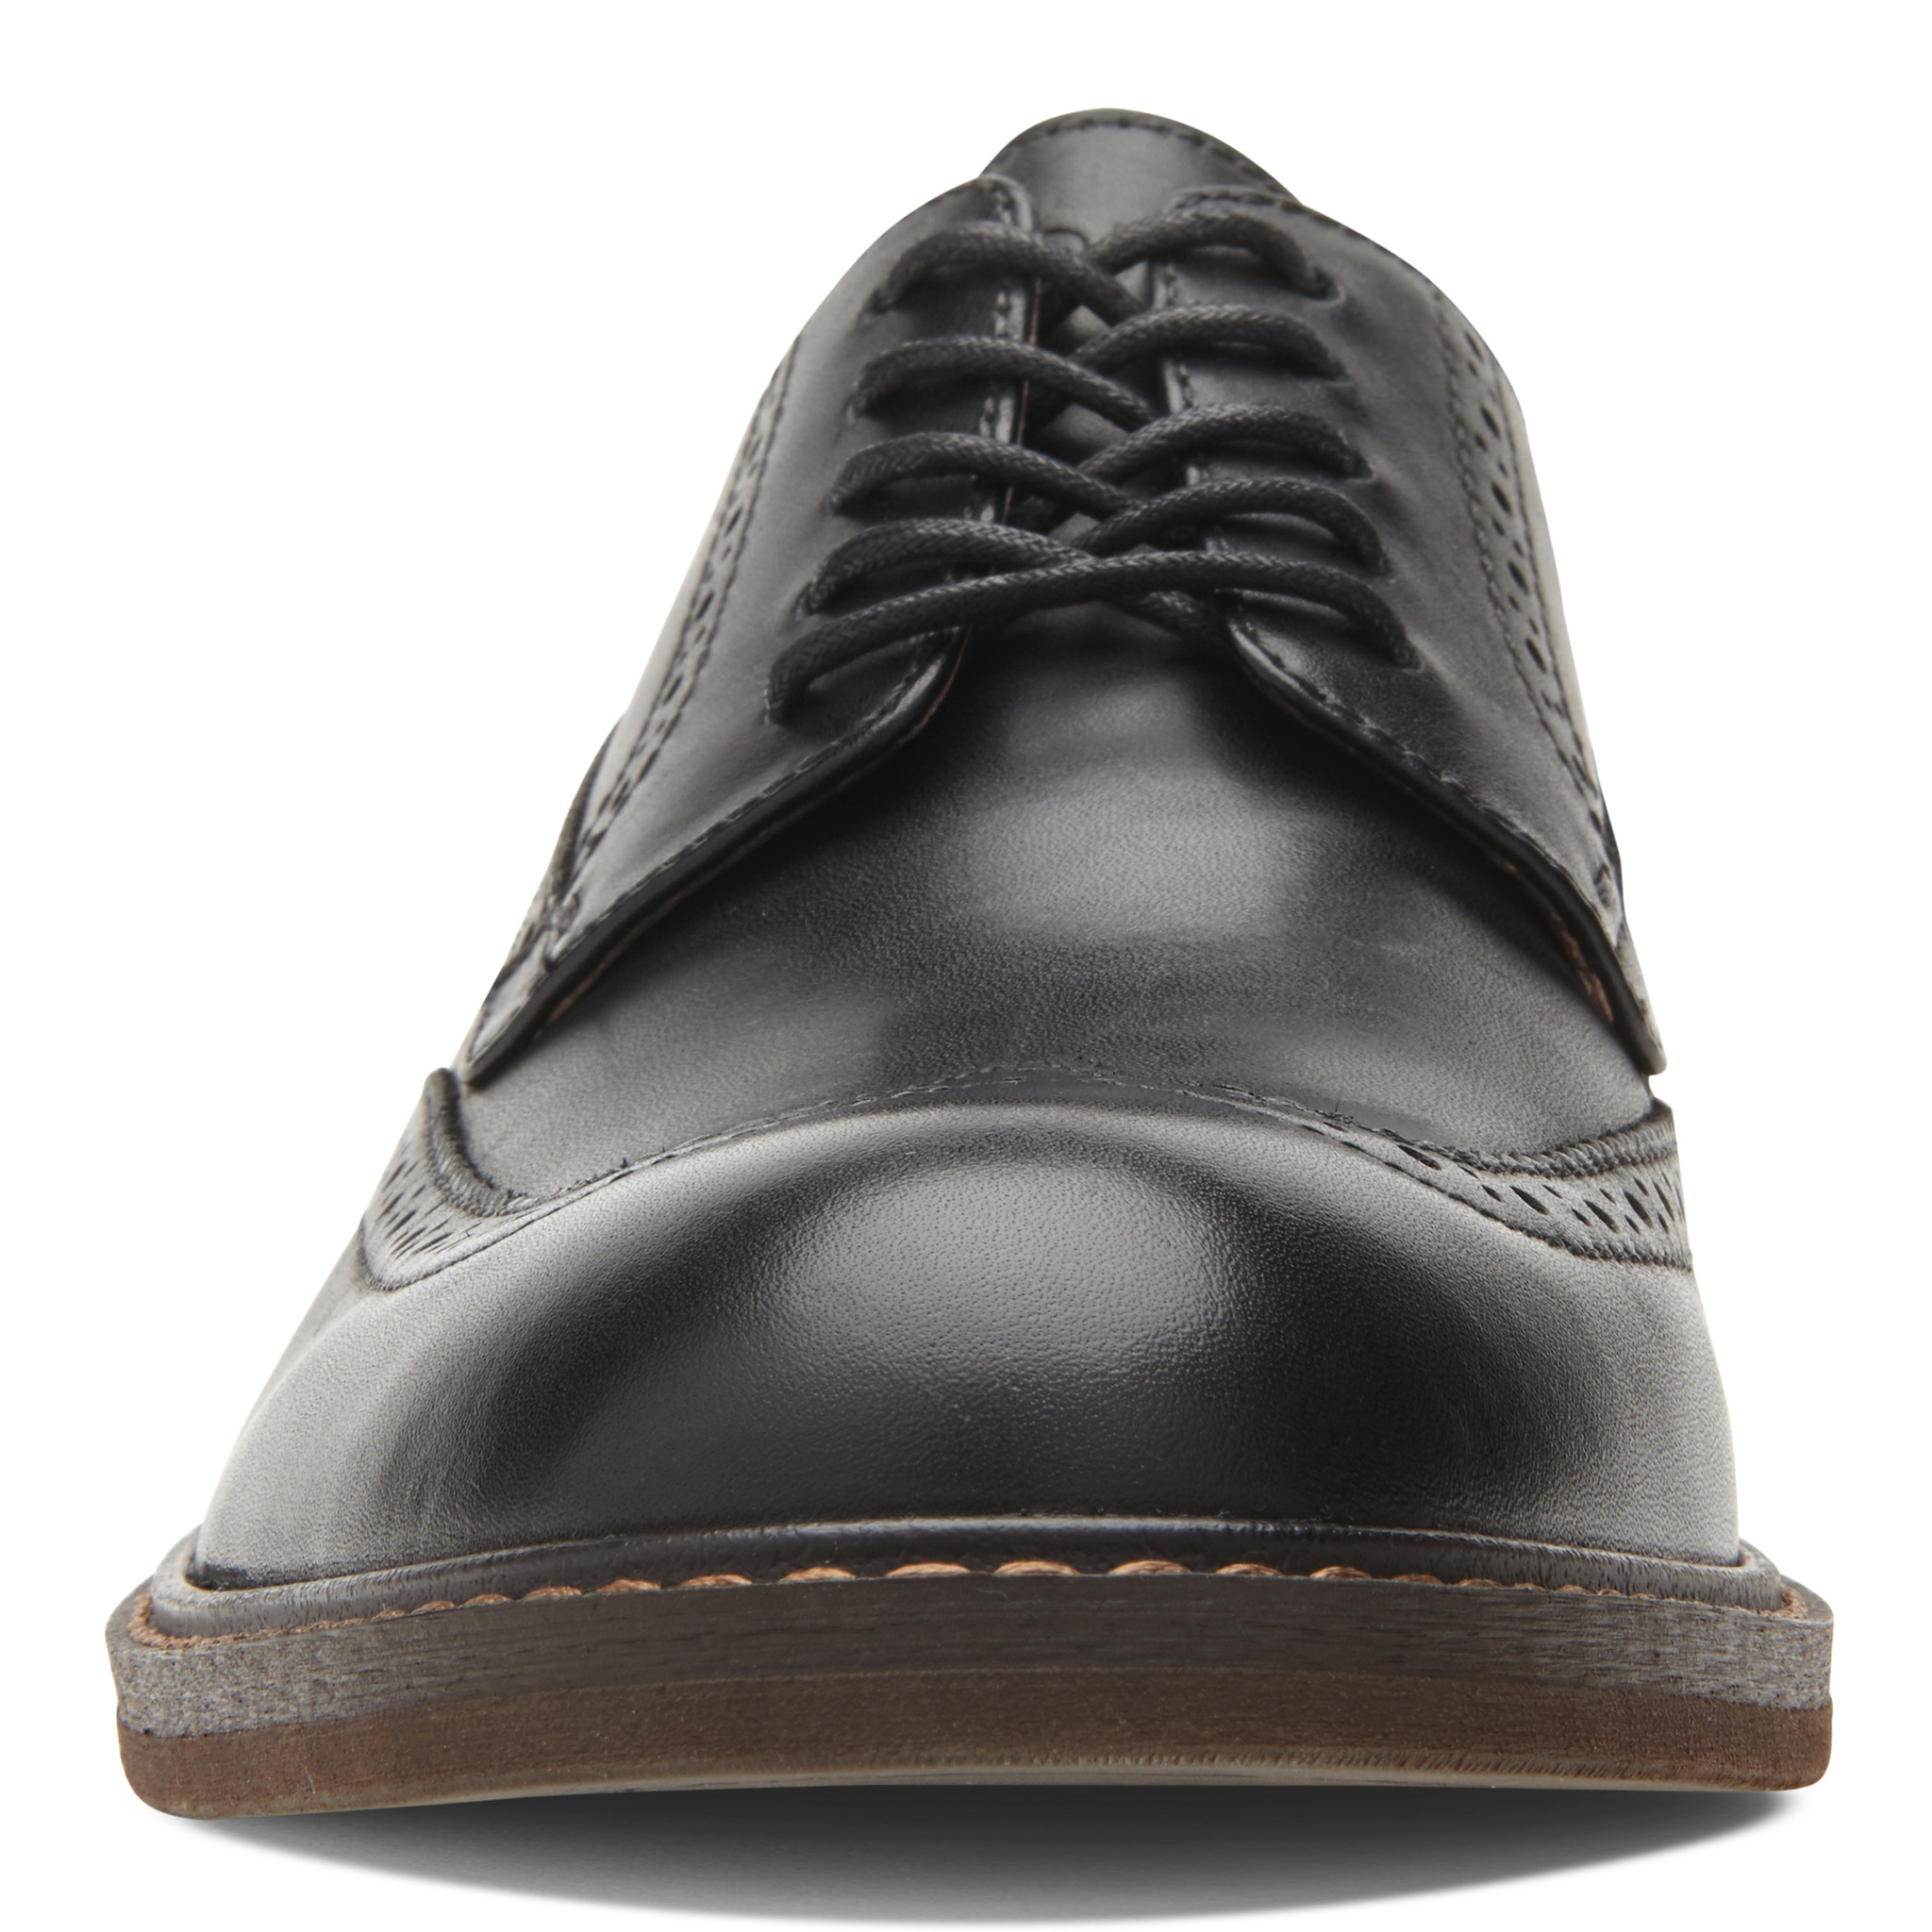 Details about   Vionic Men's Bowery Bruno Wingtip Oxford Grey 